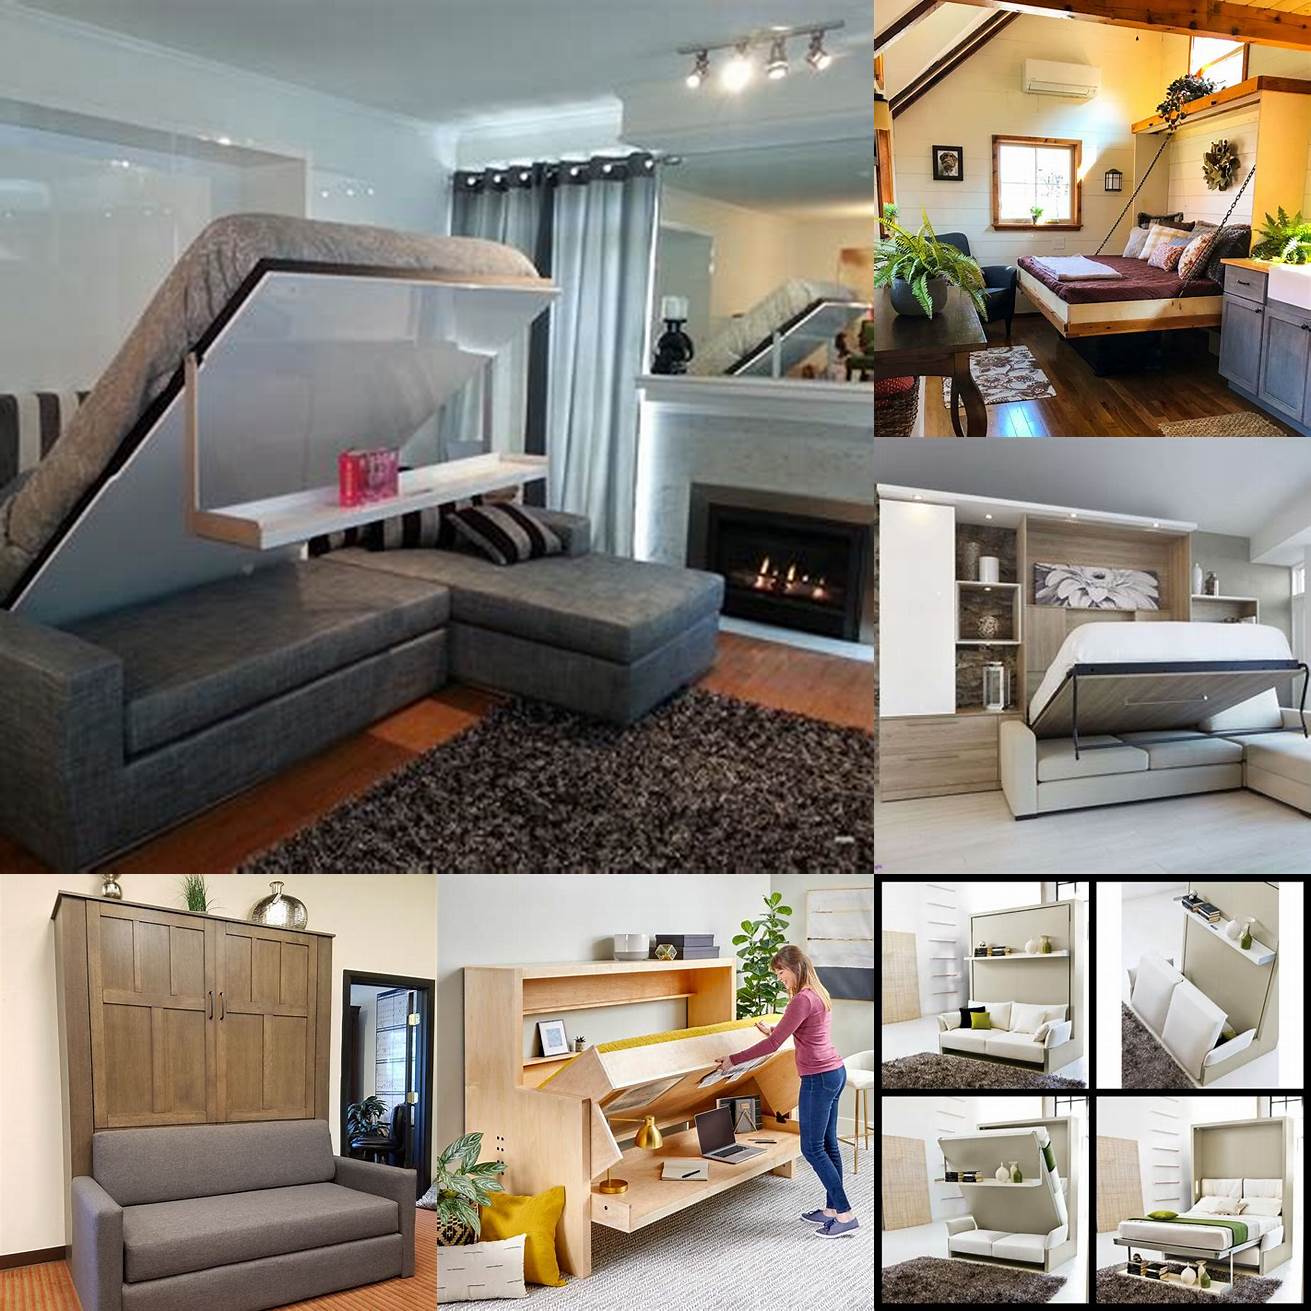 A space-saving Murphy Bed Sofa in a tiny house